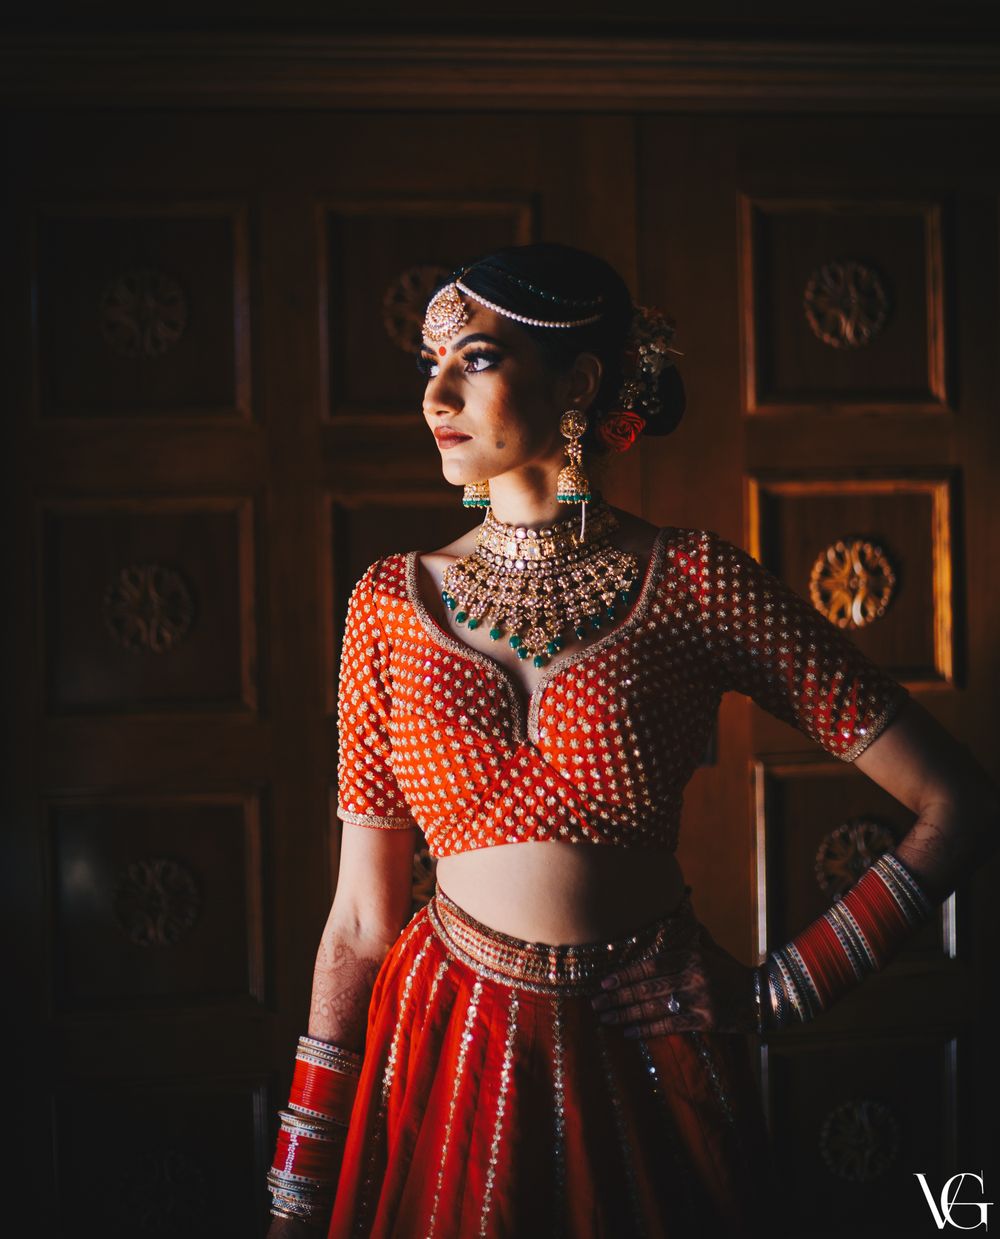 Photo of Bride getting ready shot wearing a red choli cut blouse